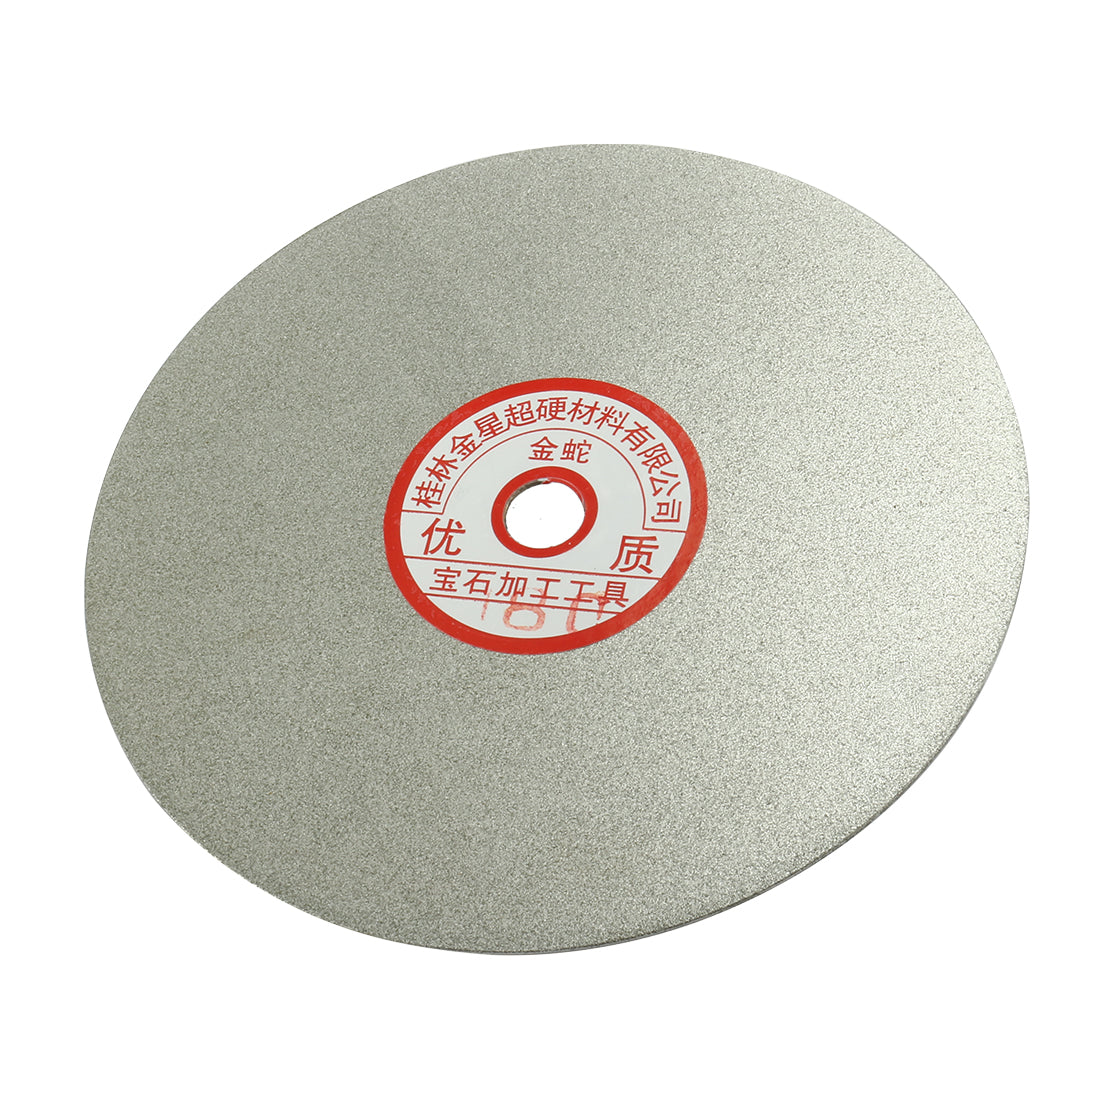 uxcell Uxcell 6-inch Grit 180 Diamond Coated Flat Lap Wheel Grinding Sanding Polishing Disc